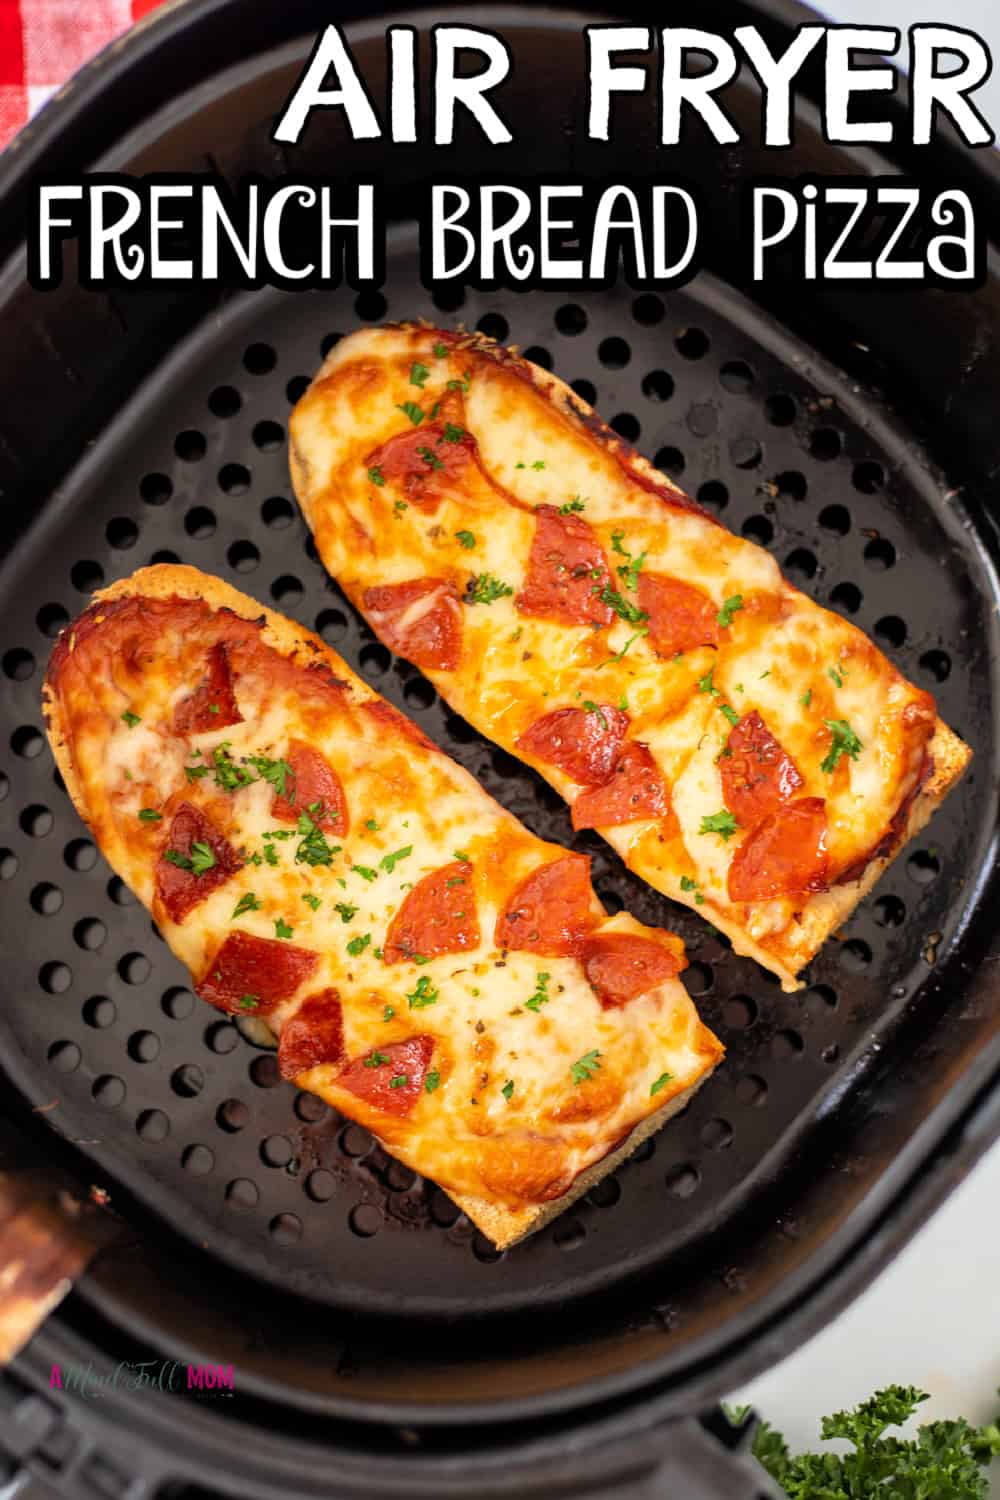 Homemade Air Fryer French Bread Pizza is a million times better than the frozen pizza and so easy to make! This French Bread Pizza is made with french bread, pizza sauce, cheese, and your favorite toppings to create the quickest, tastiest air fryer pizza. 